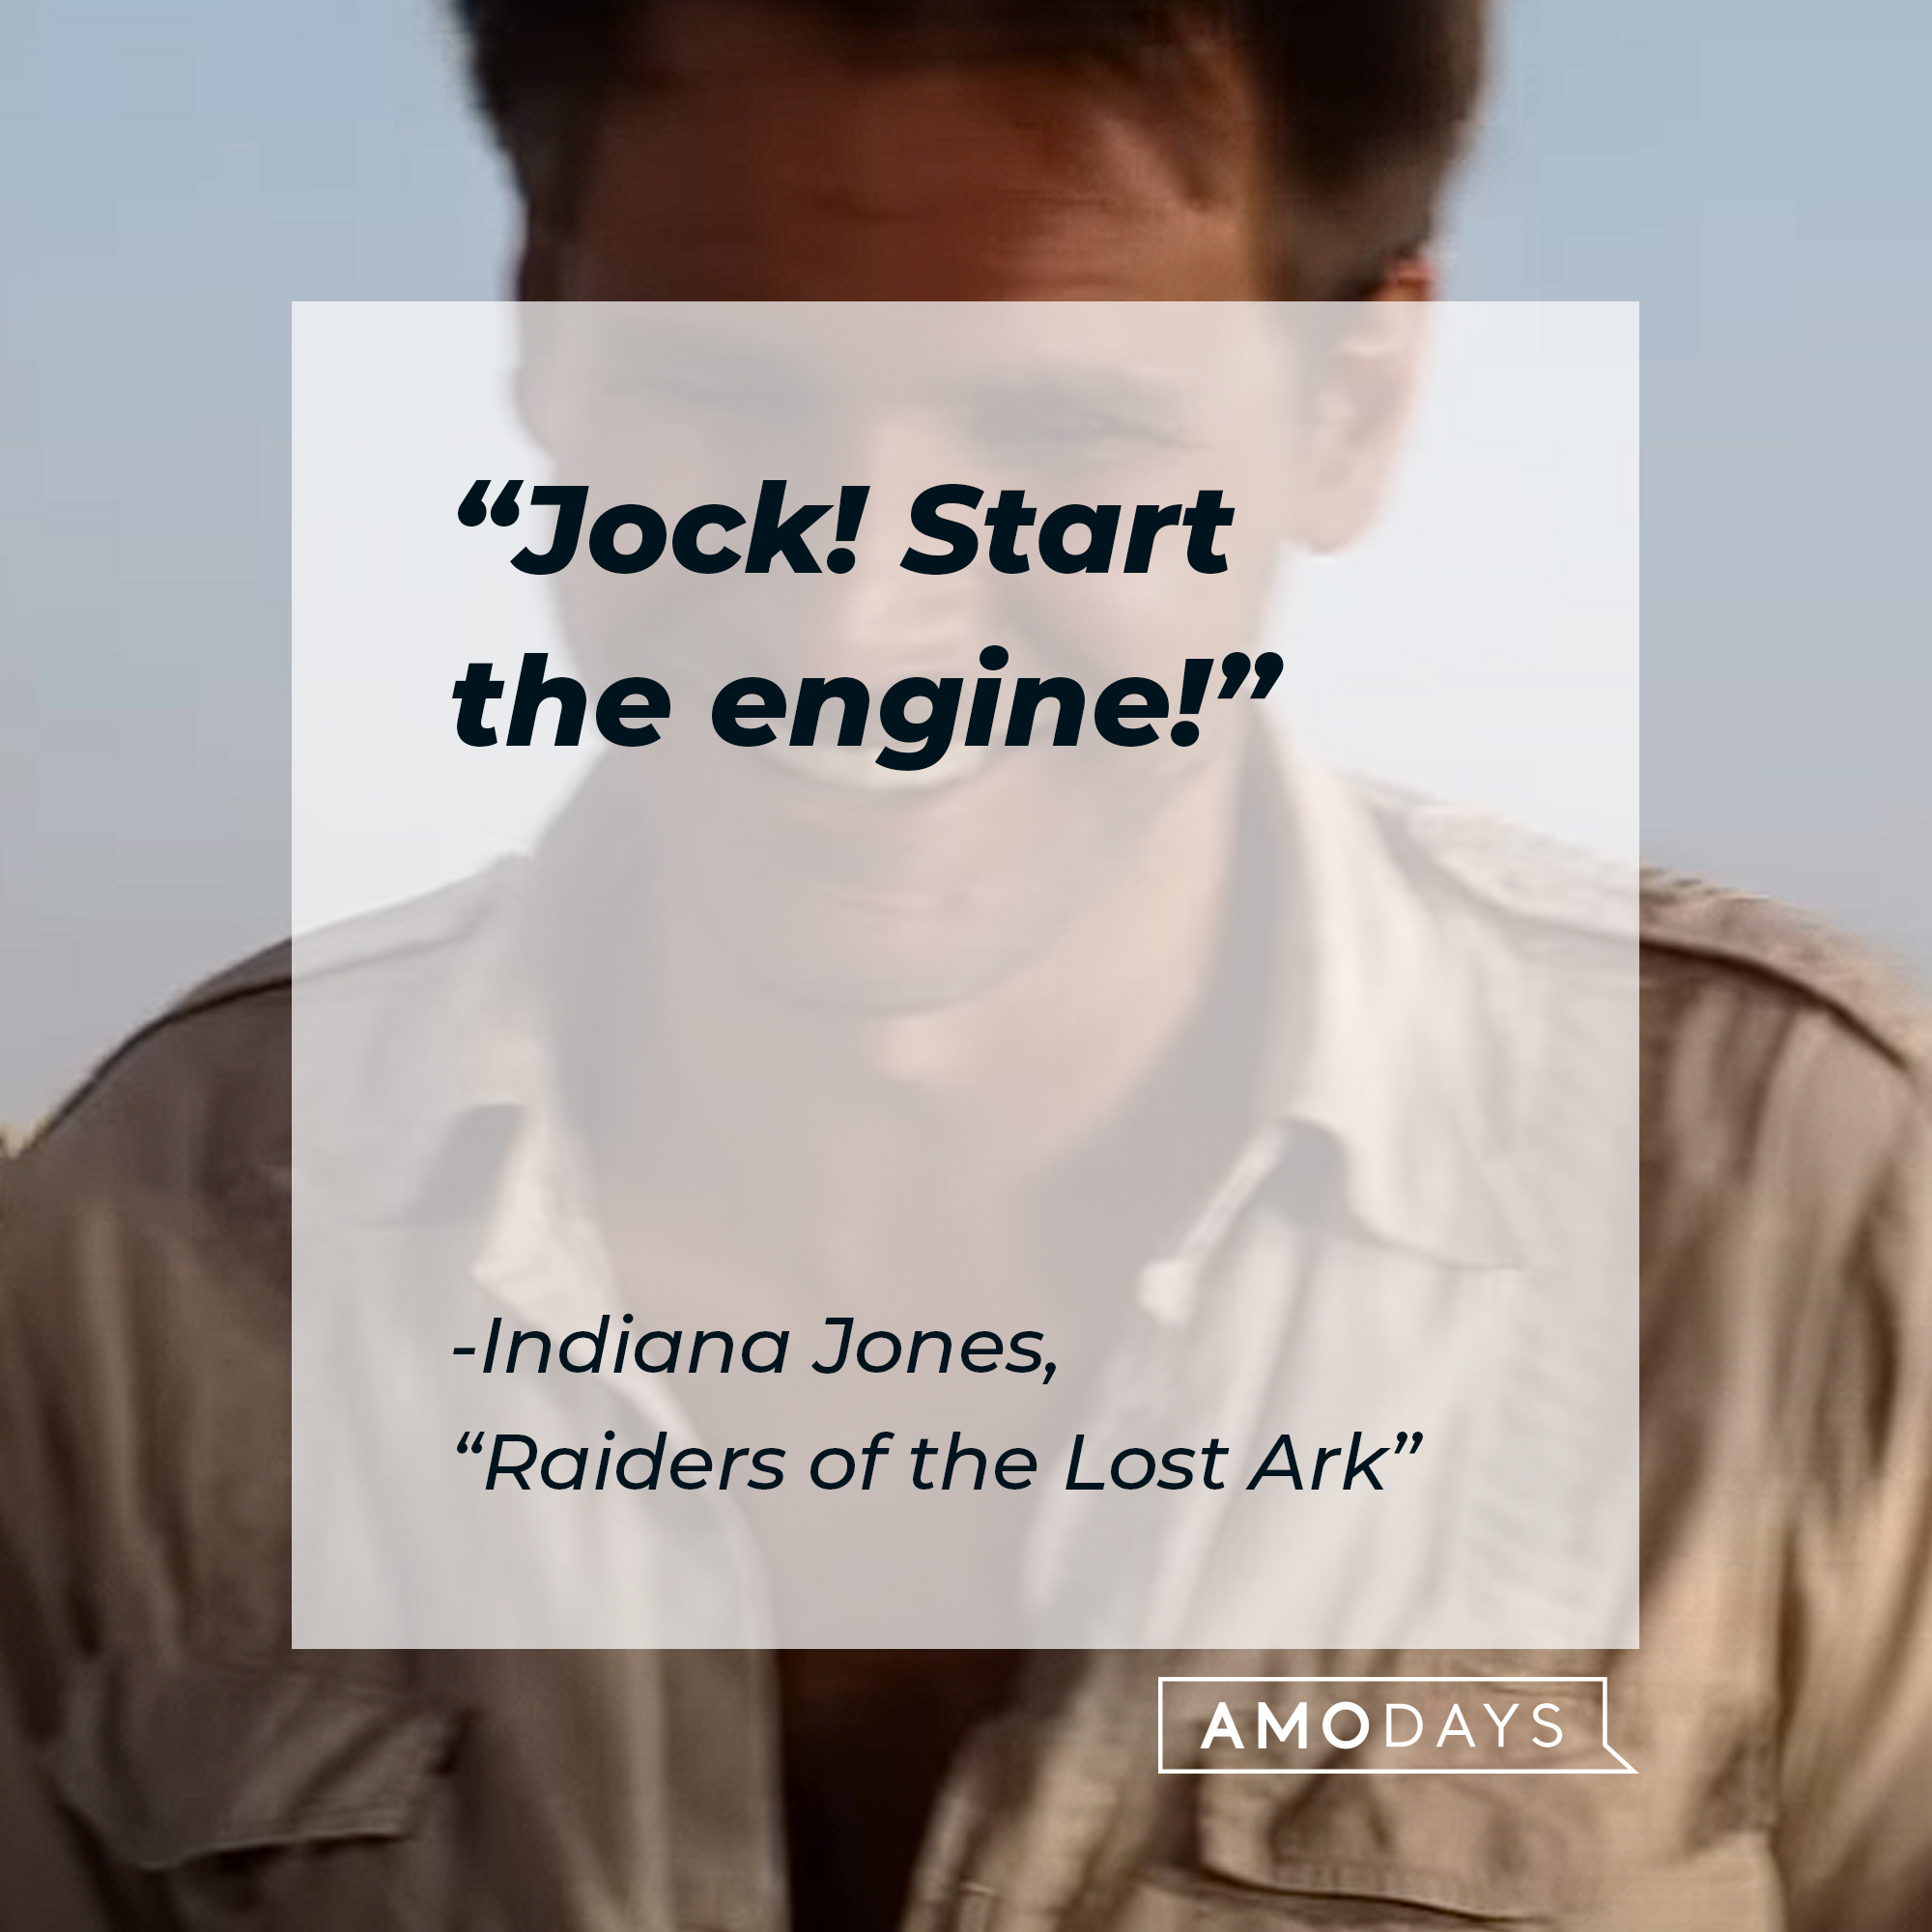 A photo of Indiana Jones with the quote, "Jock! Start the engine!" | Source: YouTube/paramountmovies